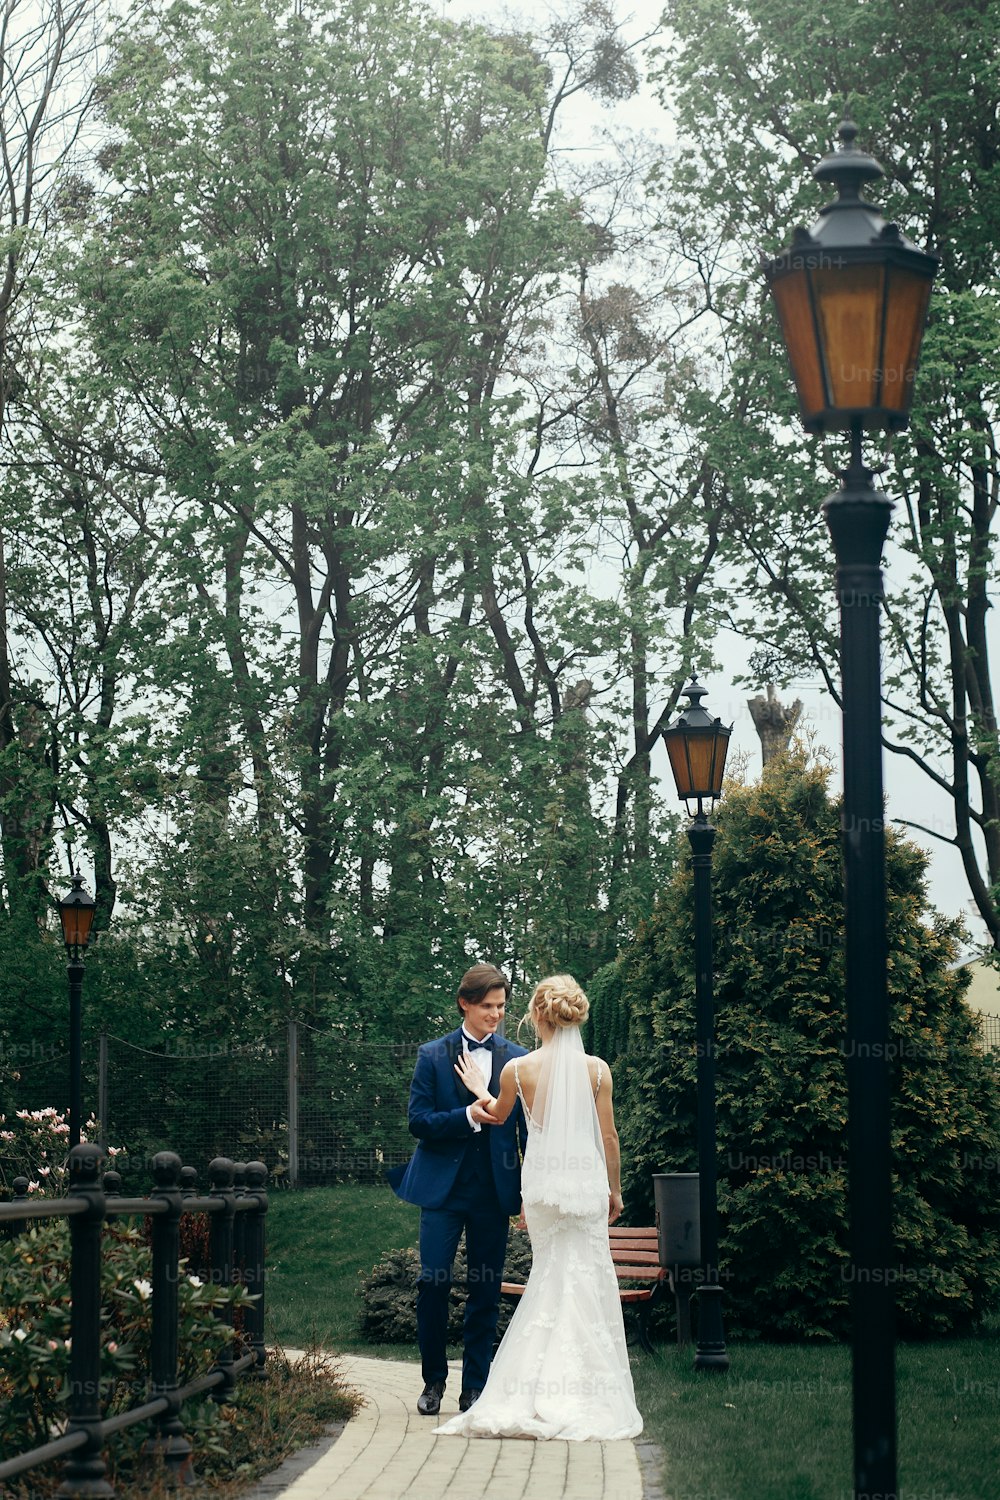 stylish bride and groom dancing in park.  happy luxury wedding couple walking and smiling among trees. man in blue suit and woman in white dress at reception outdoors